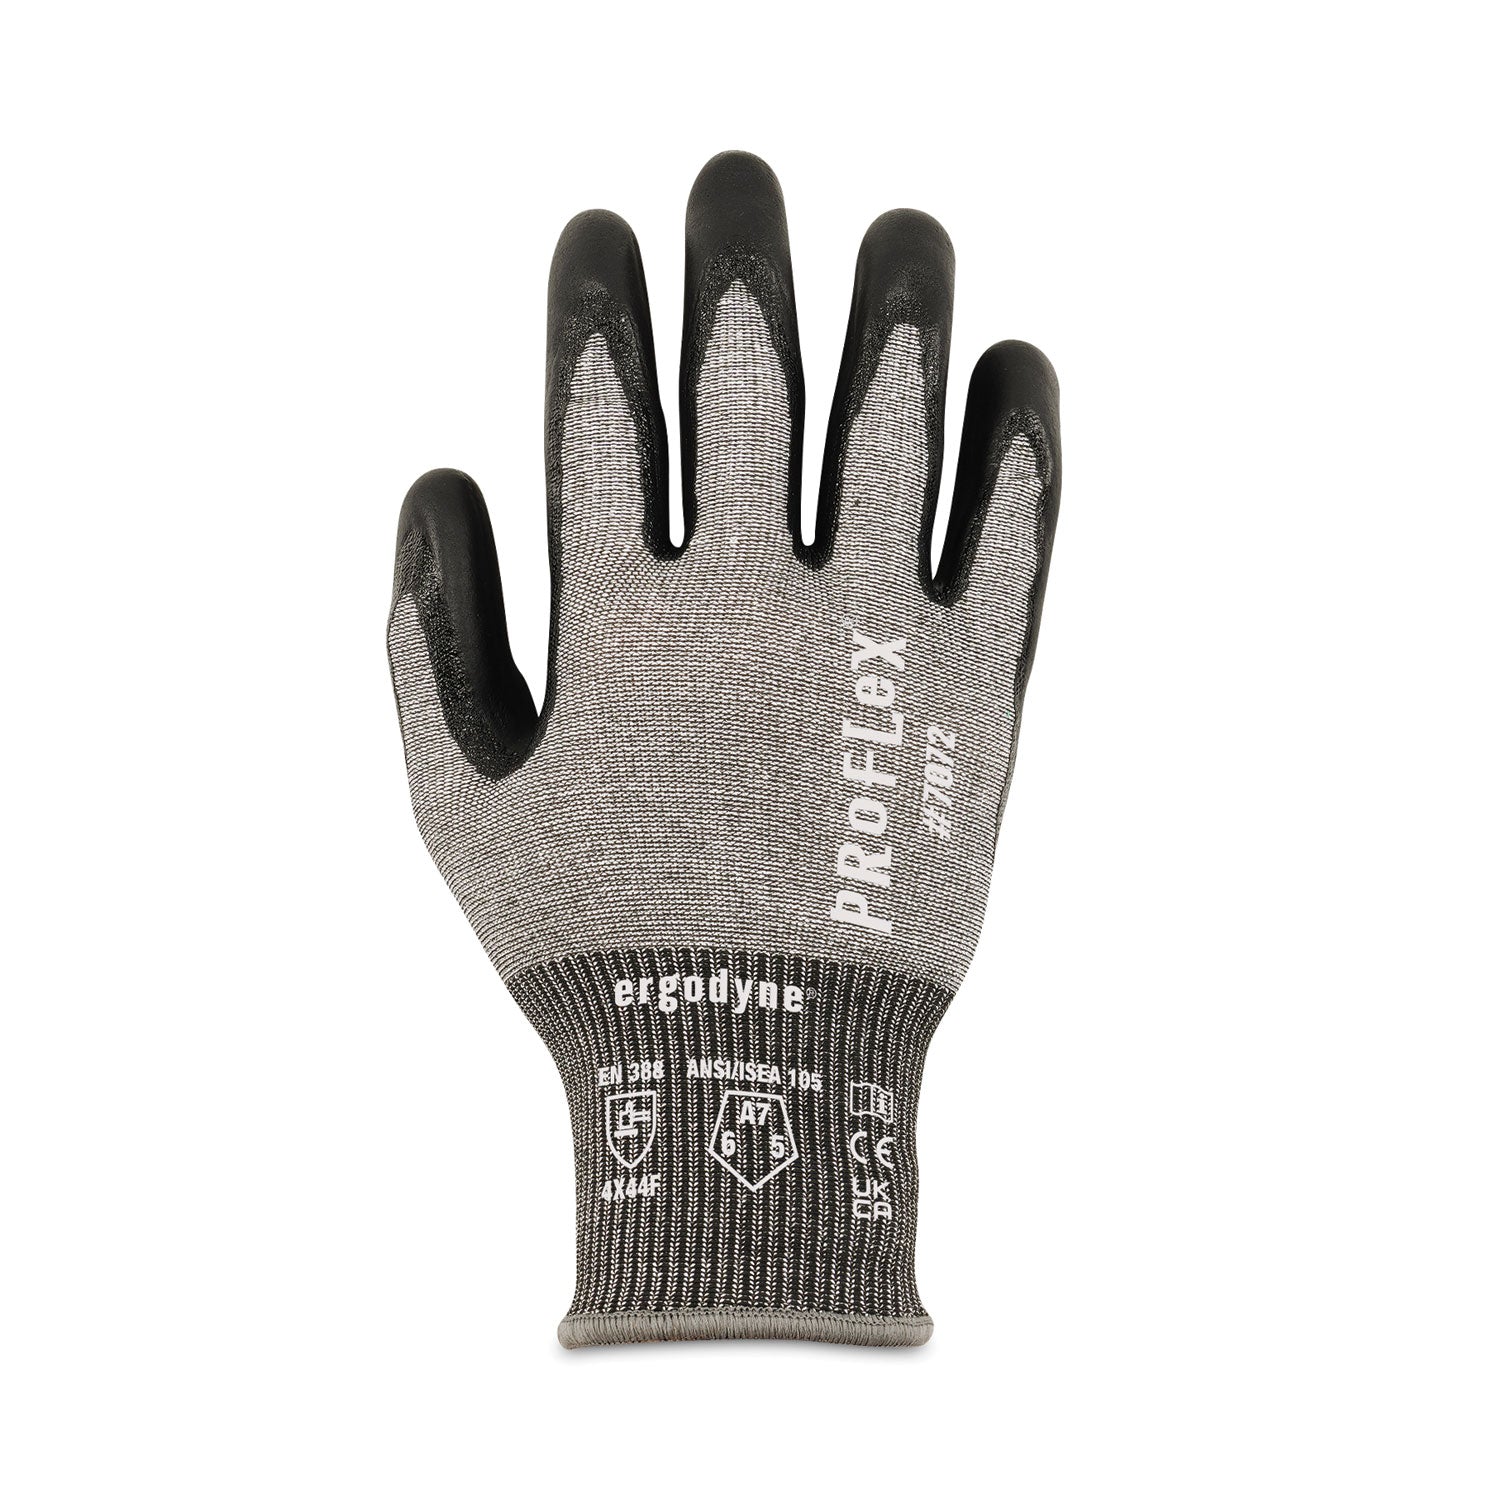 proflex-7072-ansi-a7-nitrile-coated-cr-gloves-gray-large-12-pairs-pack-ships-in-1-3-business-days_ego10304 - 2